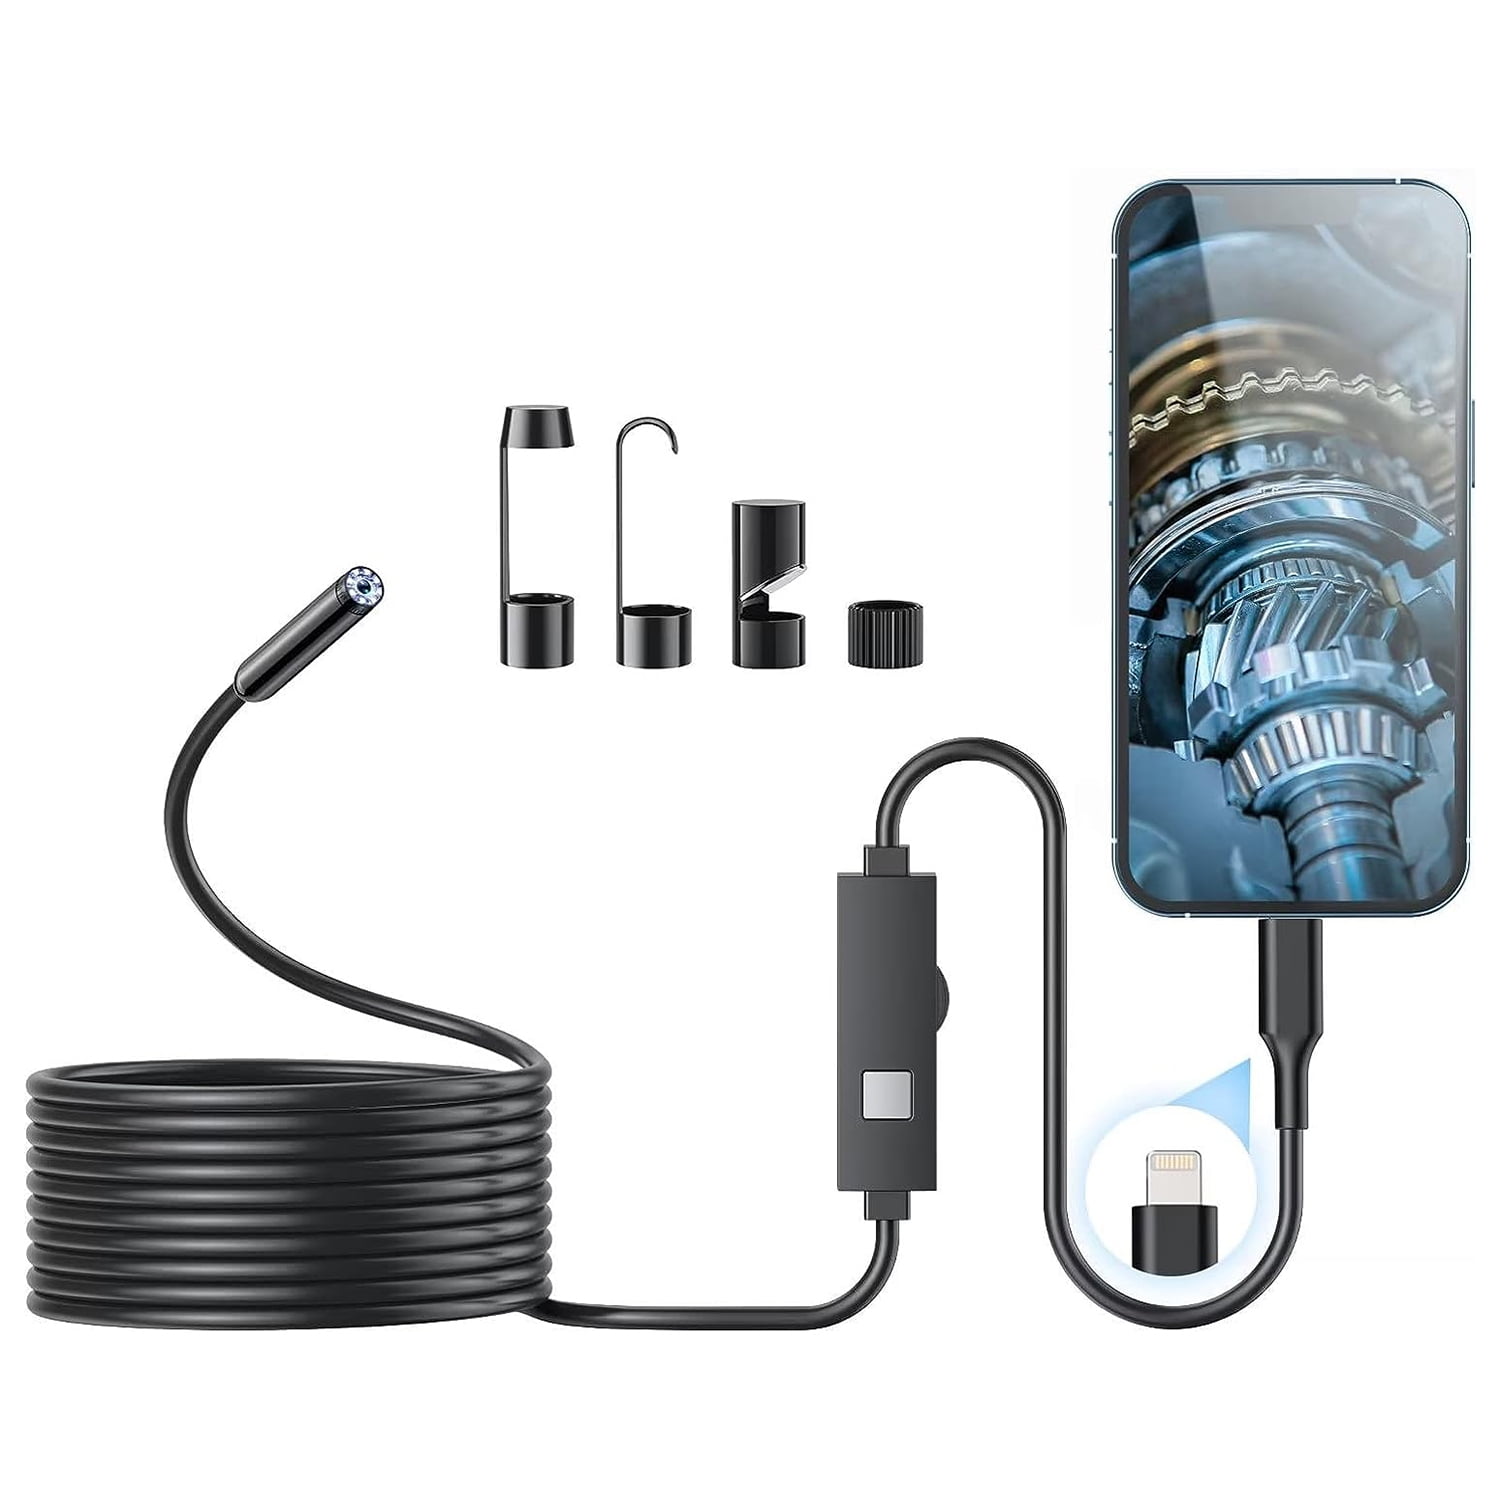  1920P Endoscope Snake Inspection Camera, Lightswim Type C  Borescope, Scope Camera with 8 LED Lights for Android and iOS Smartphone,  iPhone, iPad, Samsung (16.5 FT/5M) : Industrial & Scientific